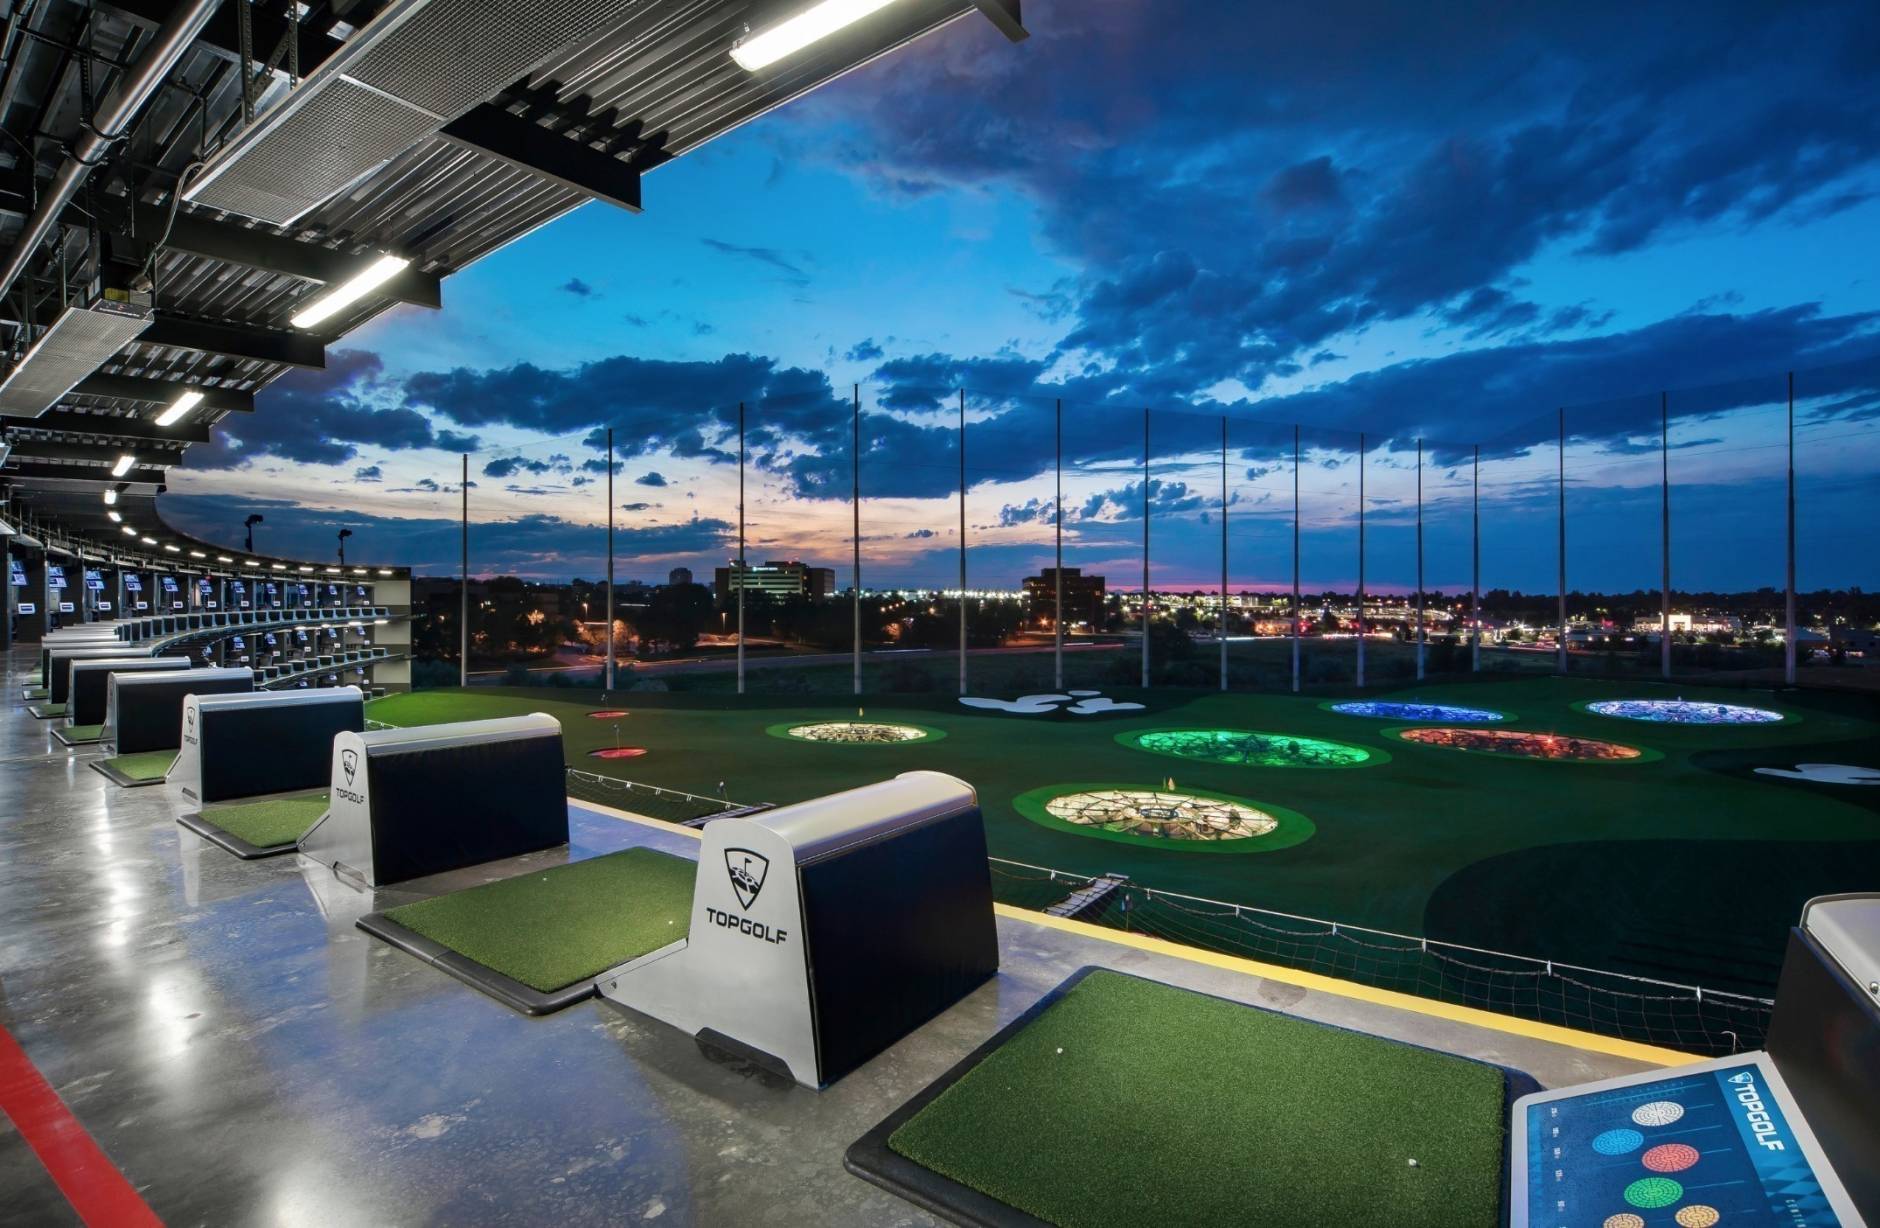 The D.C. area will get a third Topgolf location, this one in Germantown, Maryland. (Courtesy TopGolf)